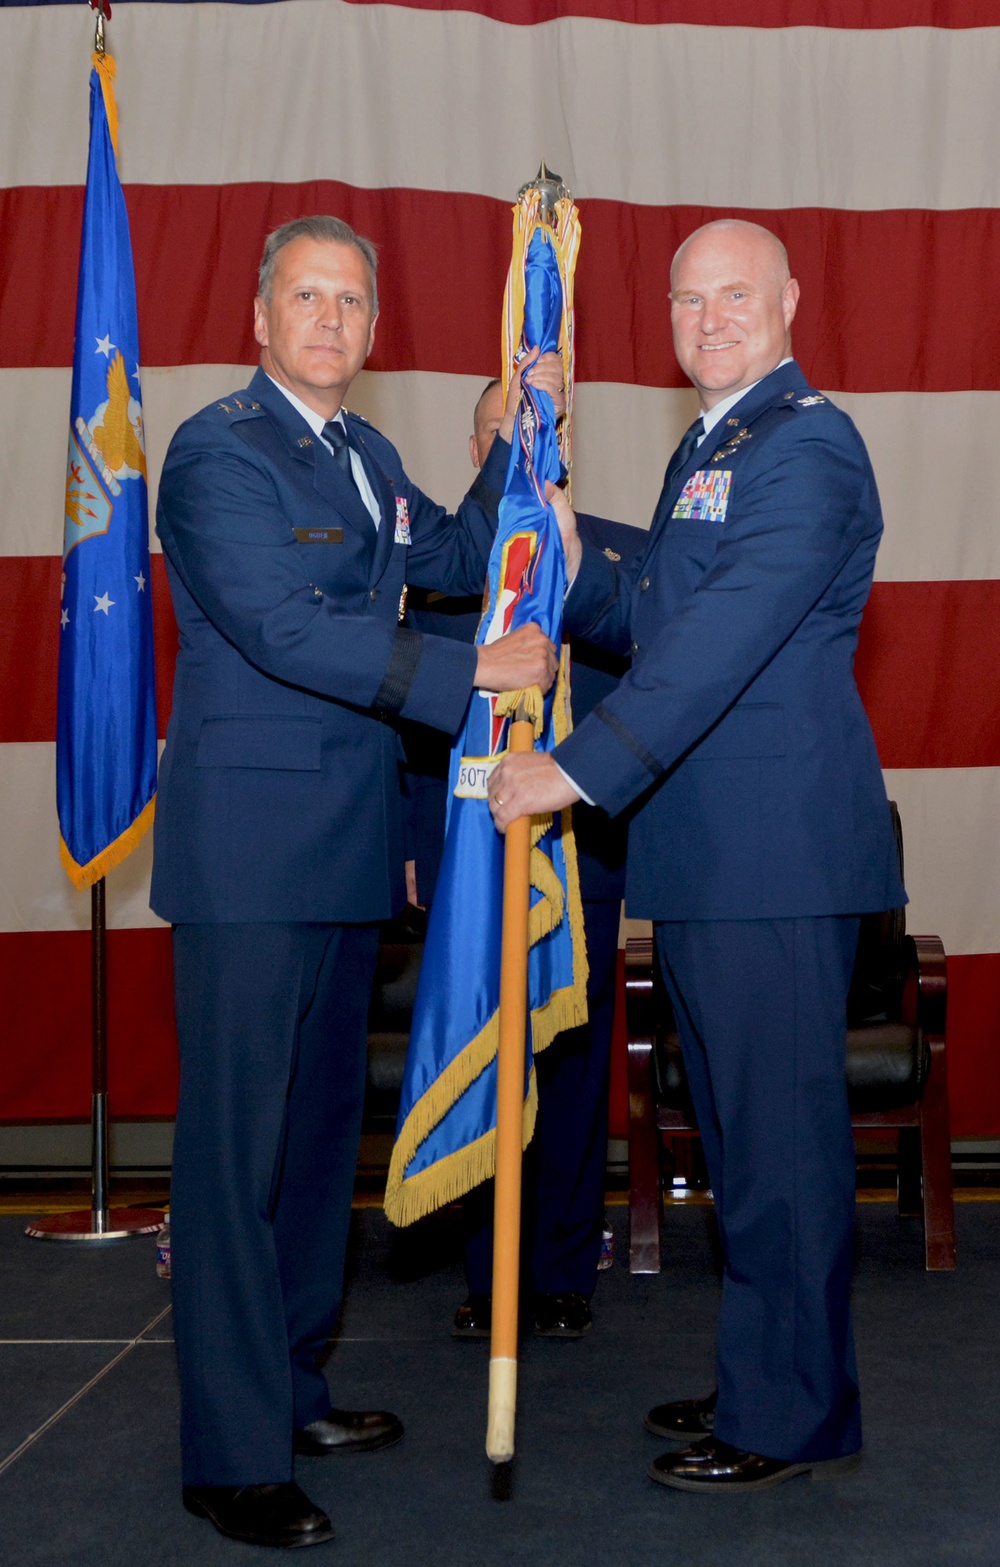 Refueling wing welcomes new commander